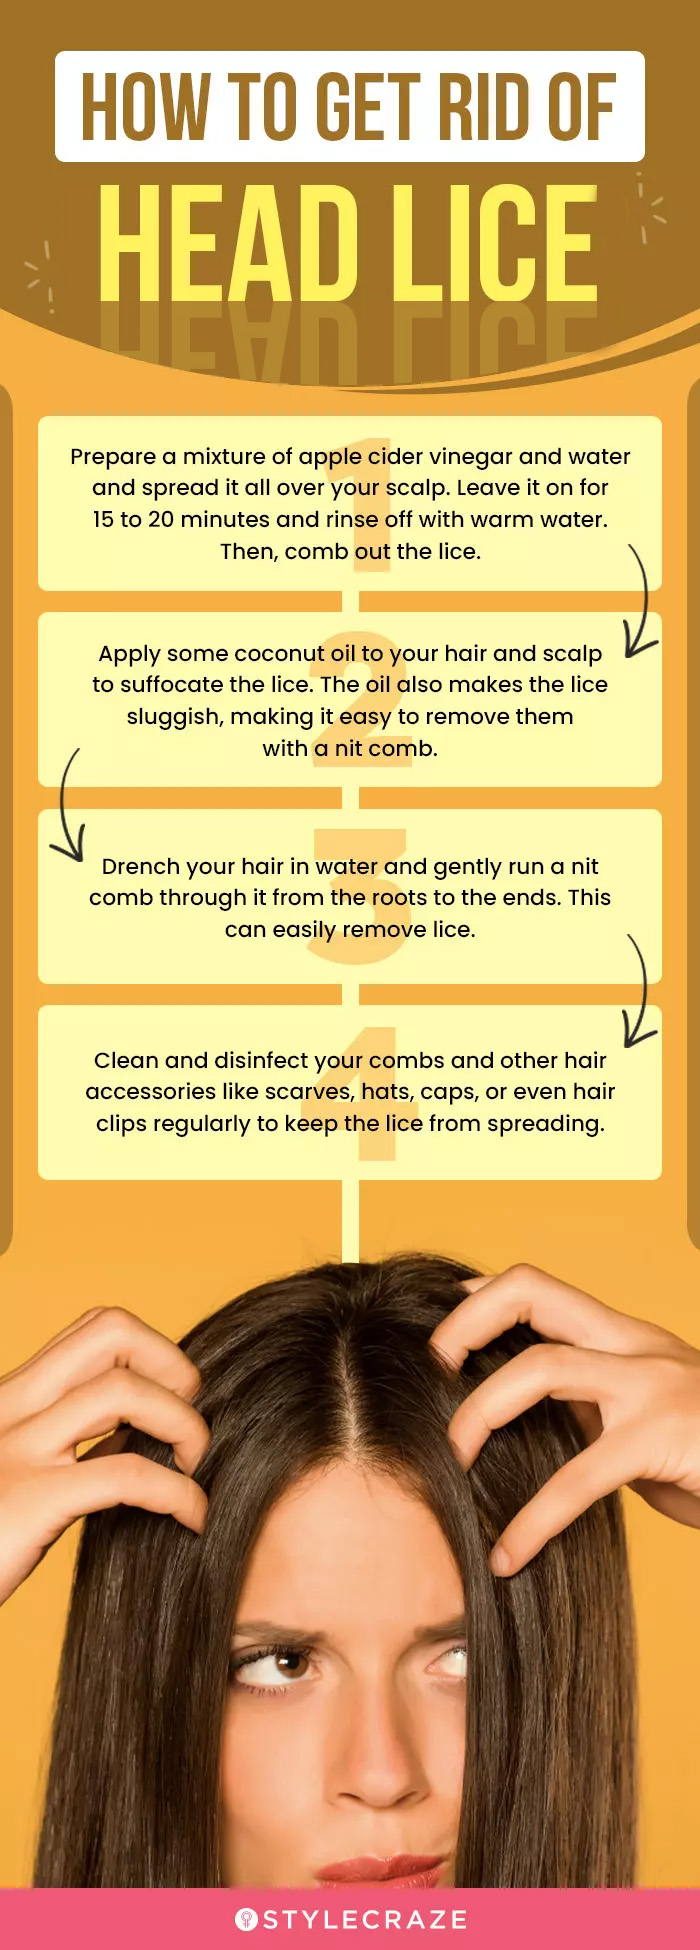 how to get rid of head lice (infographic)